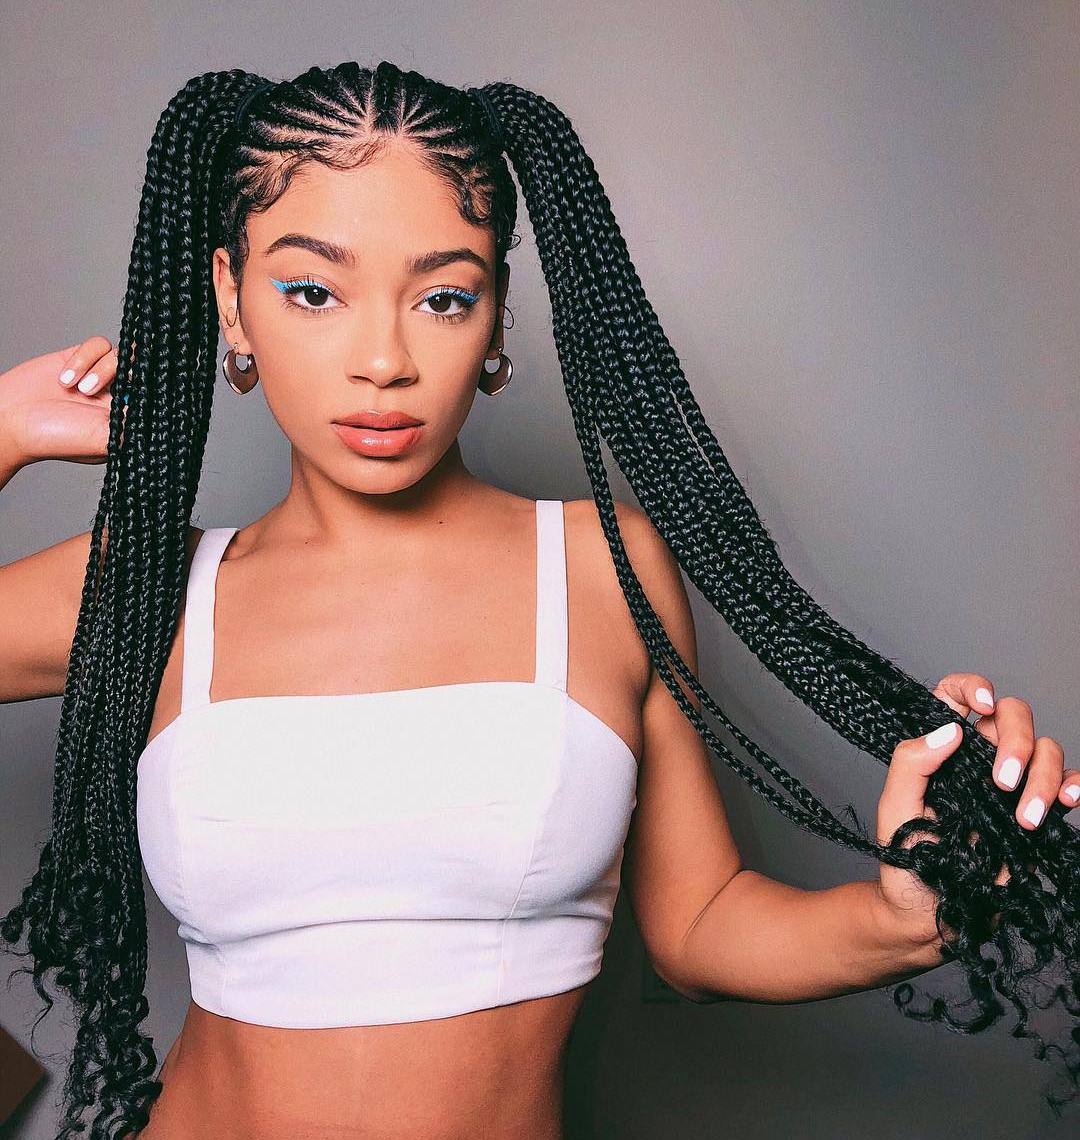 45 Pretty Braided Hairstyles For 2020 Looking Absolutely Stunning